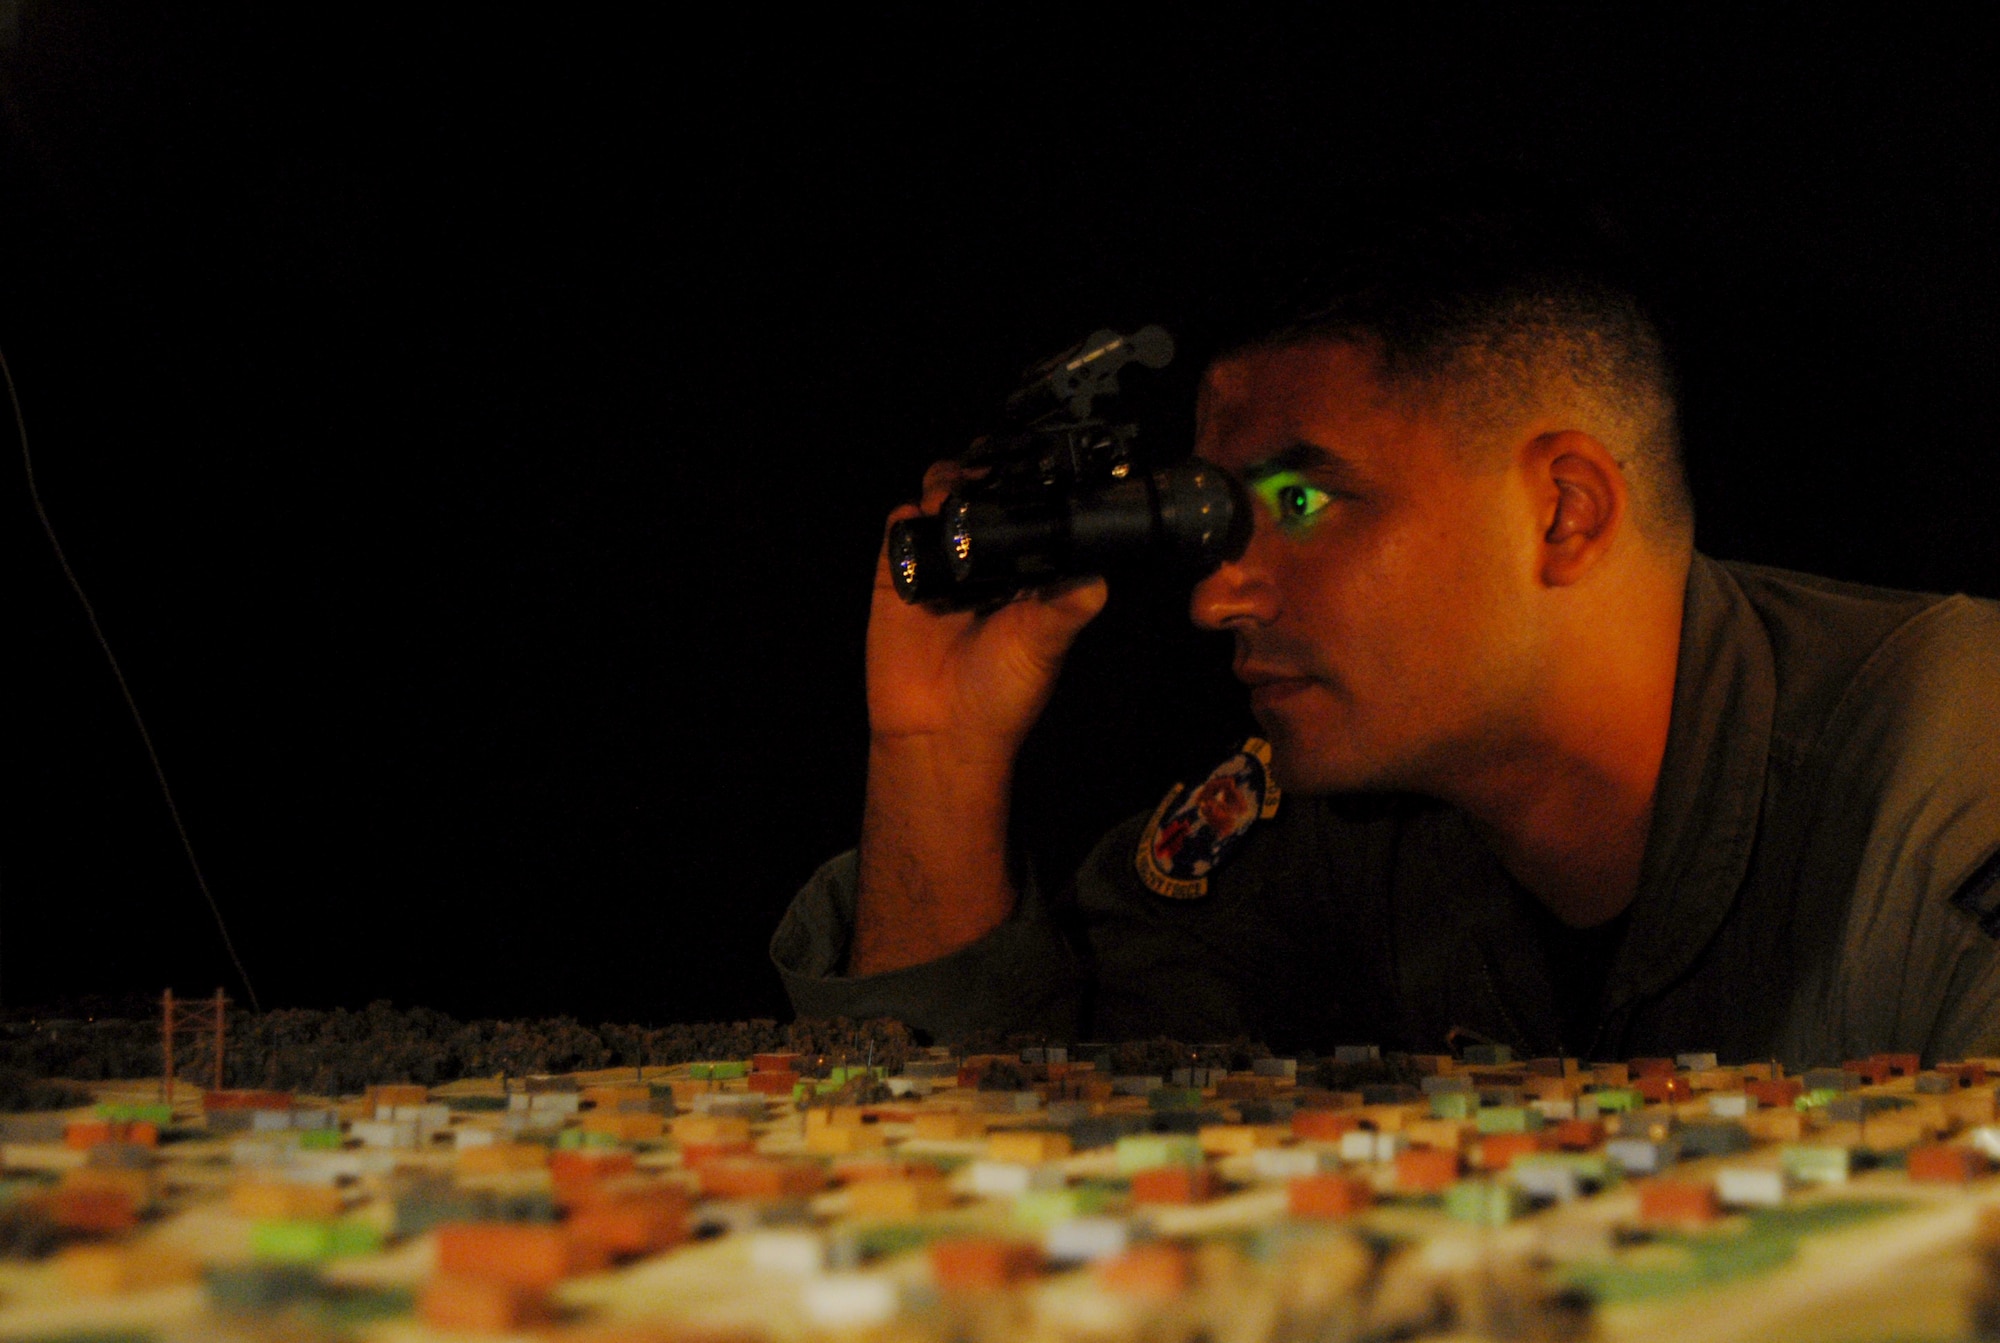 Capt. Alejandro Romas, 18th Aerospace Medicine Squadron officer in charge of
the Aerospace Physiology Operations Element, views the demonstration table
within the Night Imaging and Threat Evaluation lab at Kadena Wednesday using
a pair of night-vision goggles.  The lab teaches two separate night-vision
courses to members of the 18th Wing Security Forces and Airmen using aircrew
flight equipment in order to orient them with the use of the technology.
(U.S. Air Force photo/Staff Sgt. Christopher Marasky)